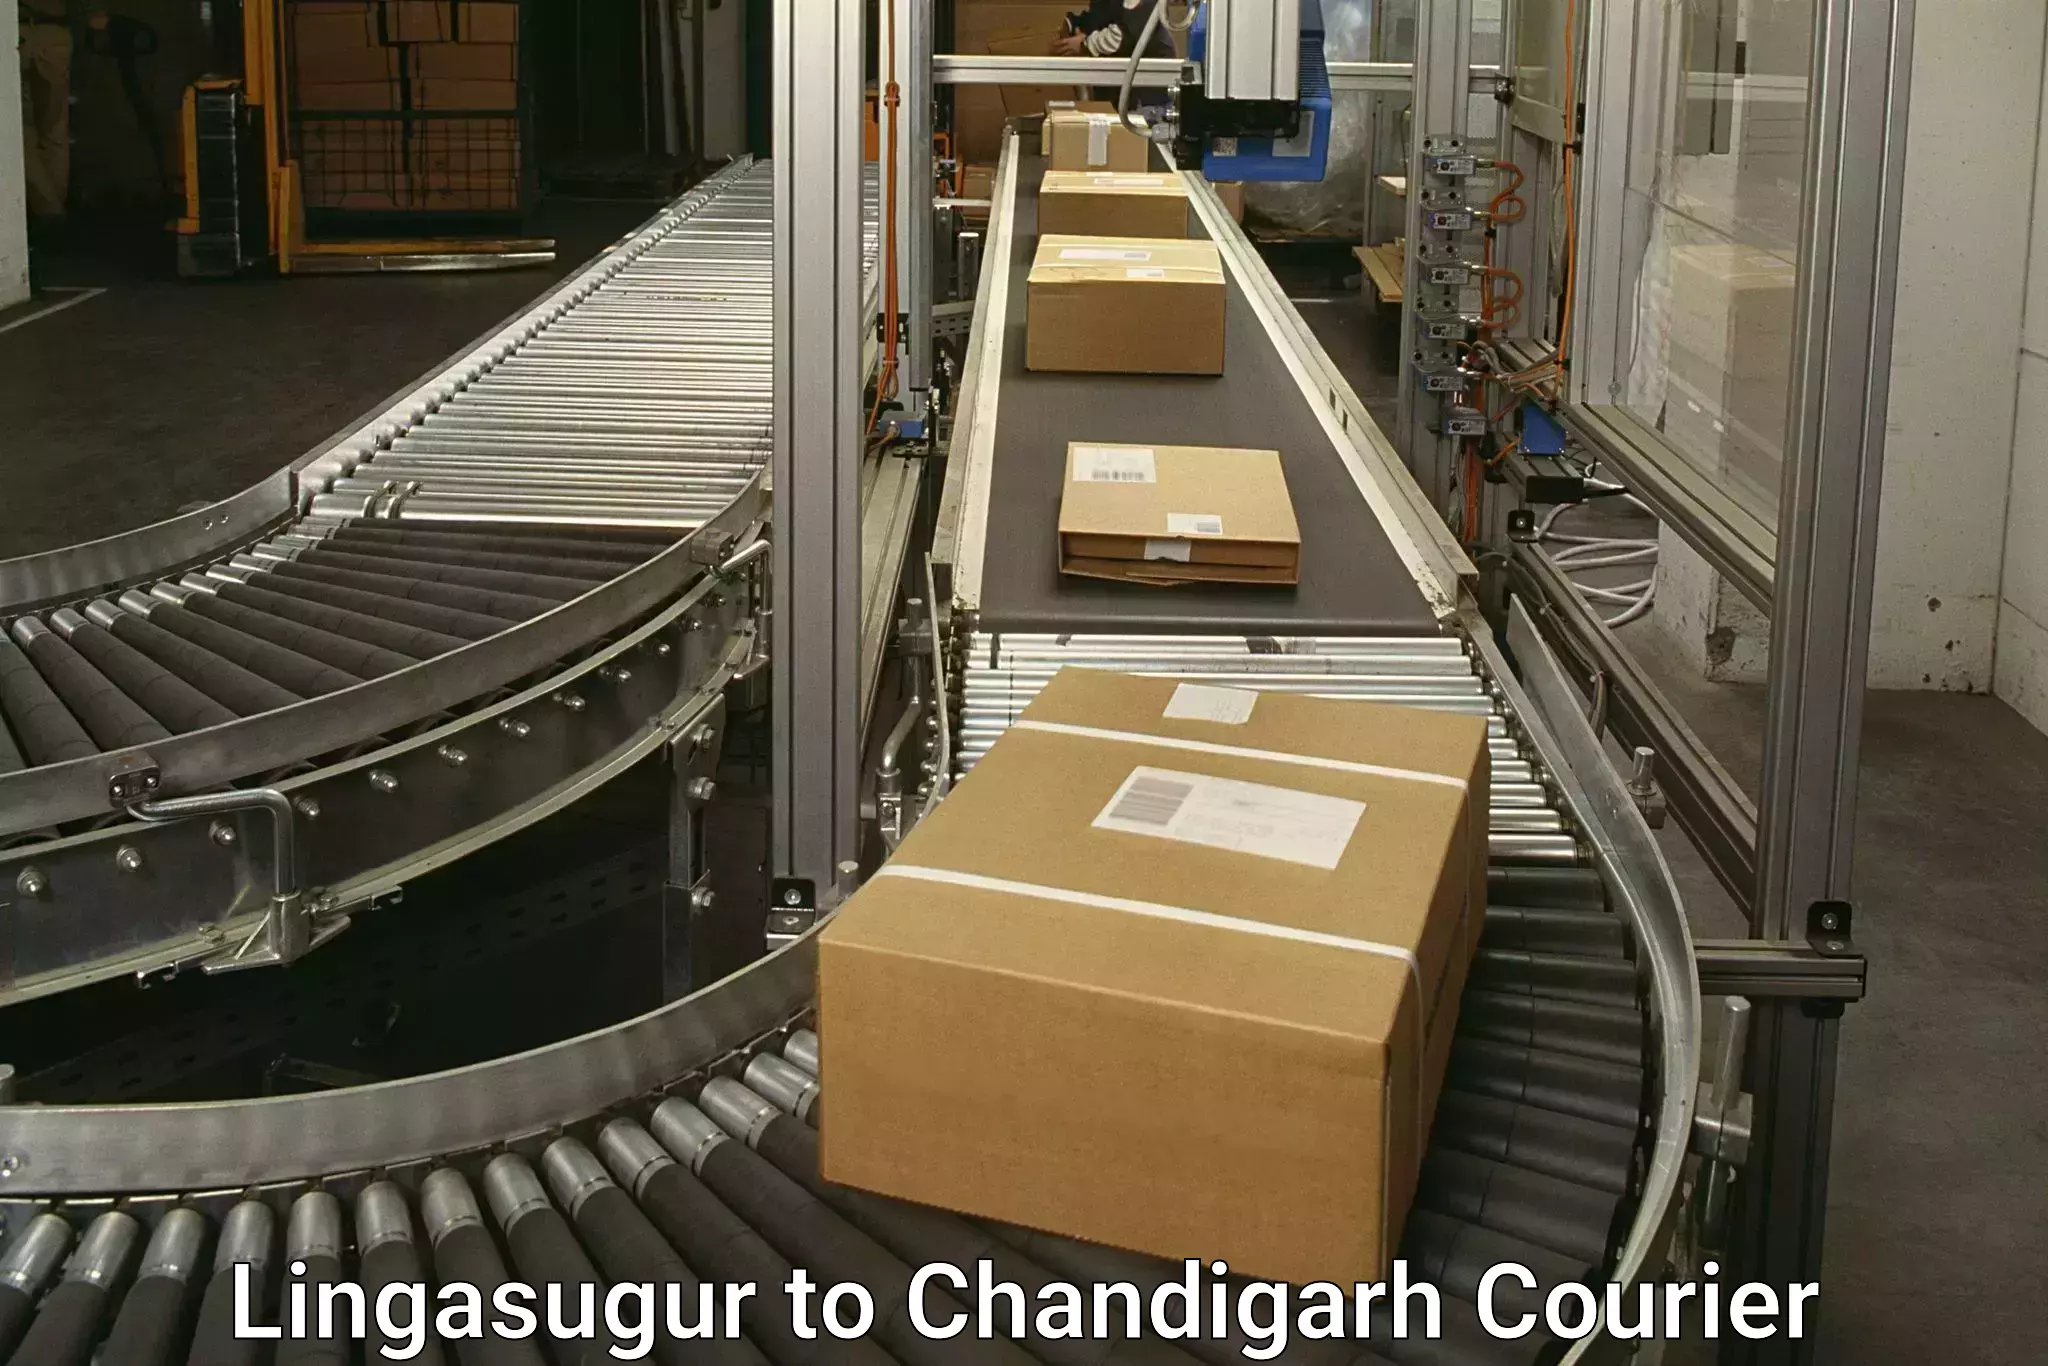 Courier service efficiency Lingasugur to Chandigarh